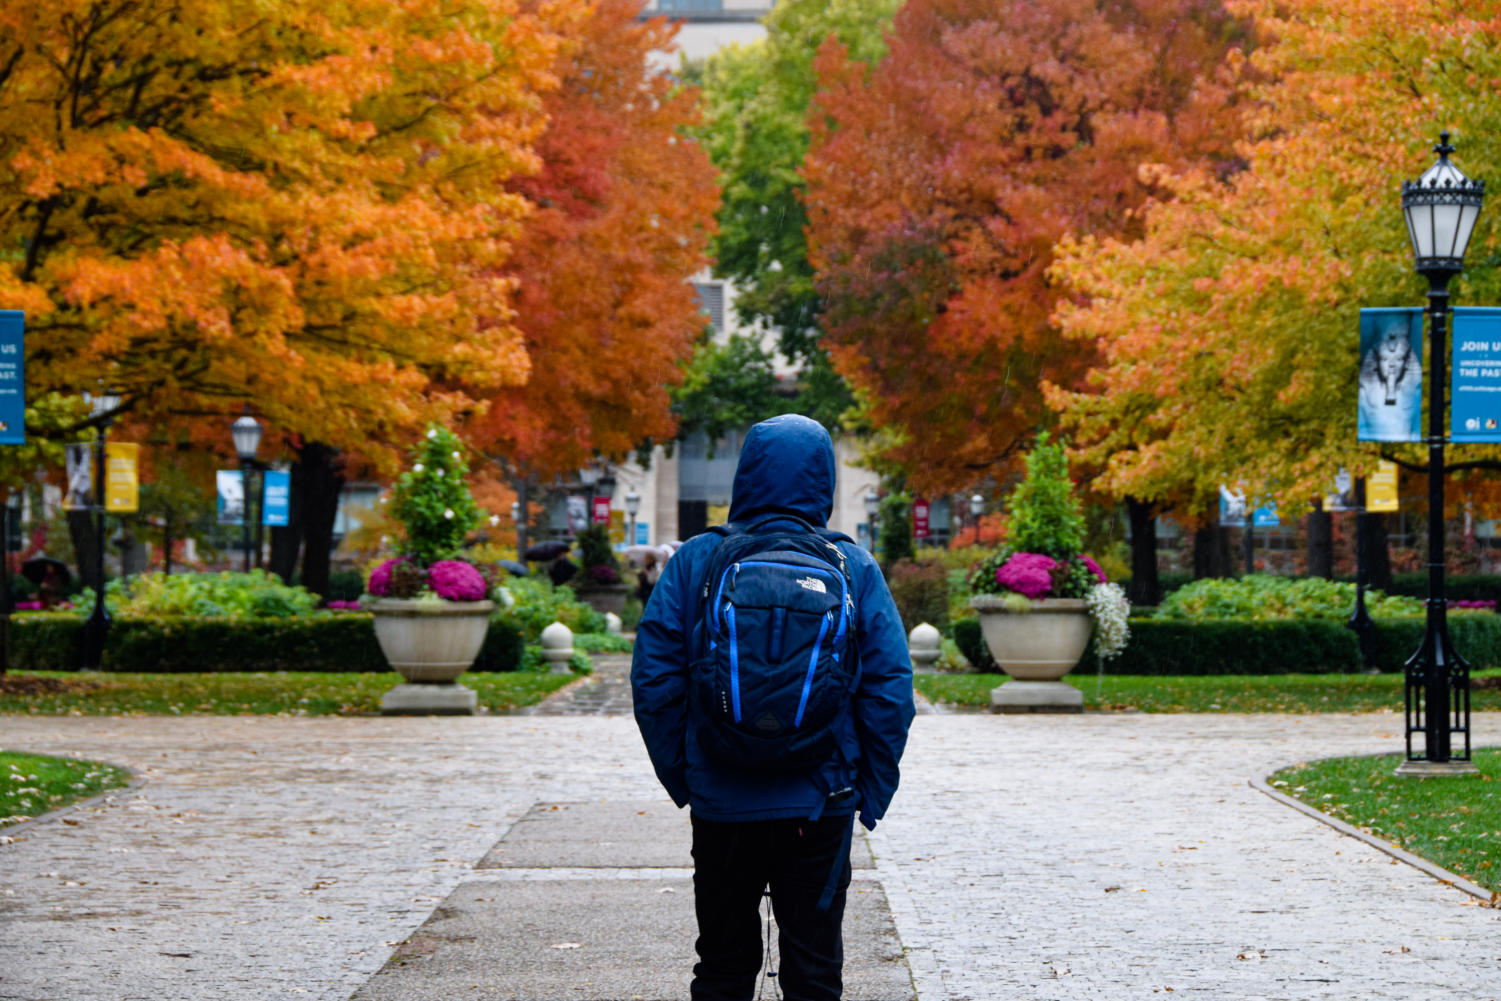 “Blue Can be a Fall Color Too:” Student clad in blue walks through the main quad on a rainy Fall day.